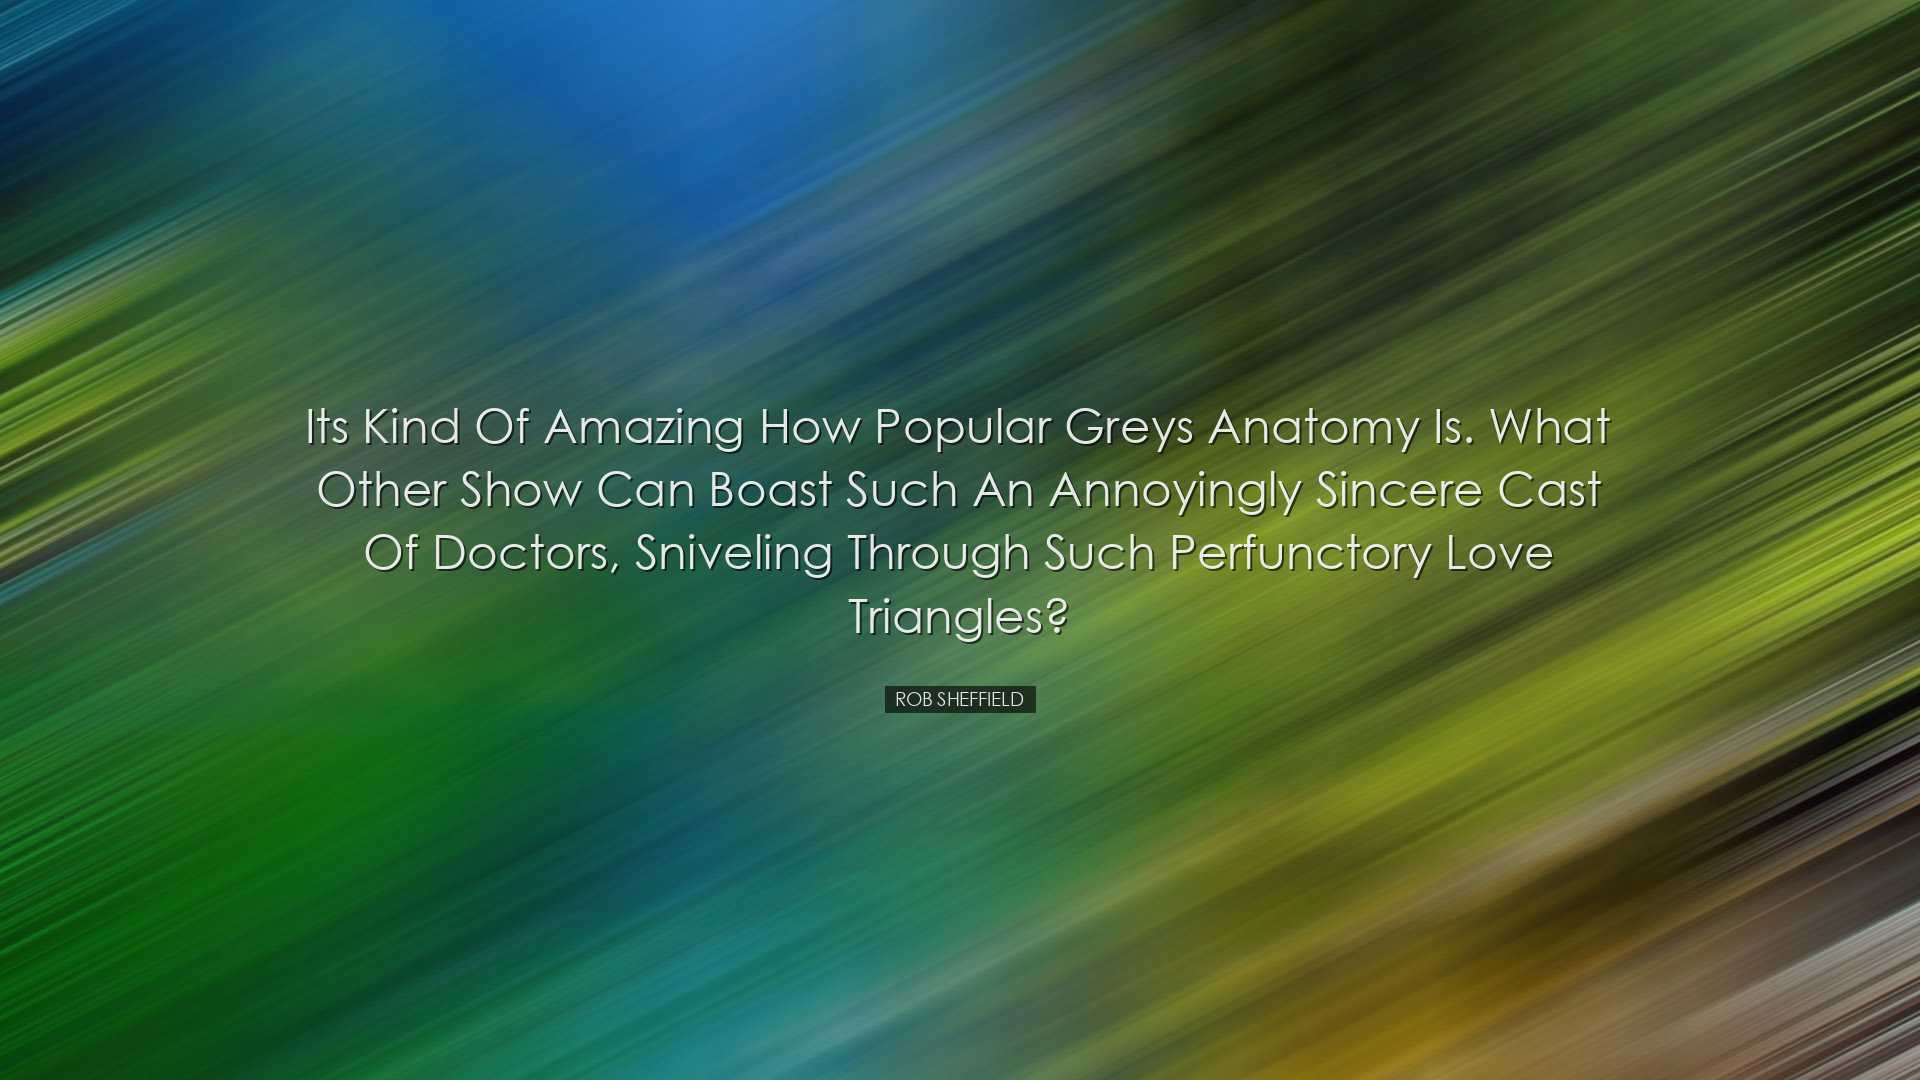 Its kind of amazing how popular Greys Anatomy is. What other show